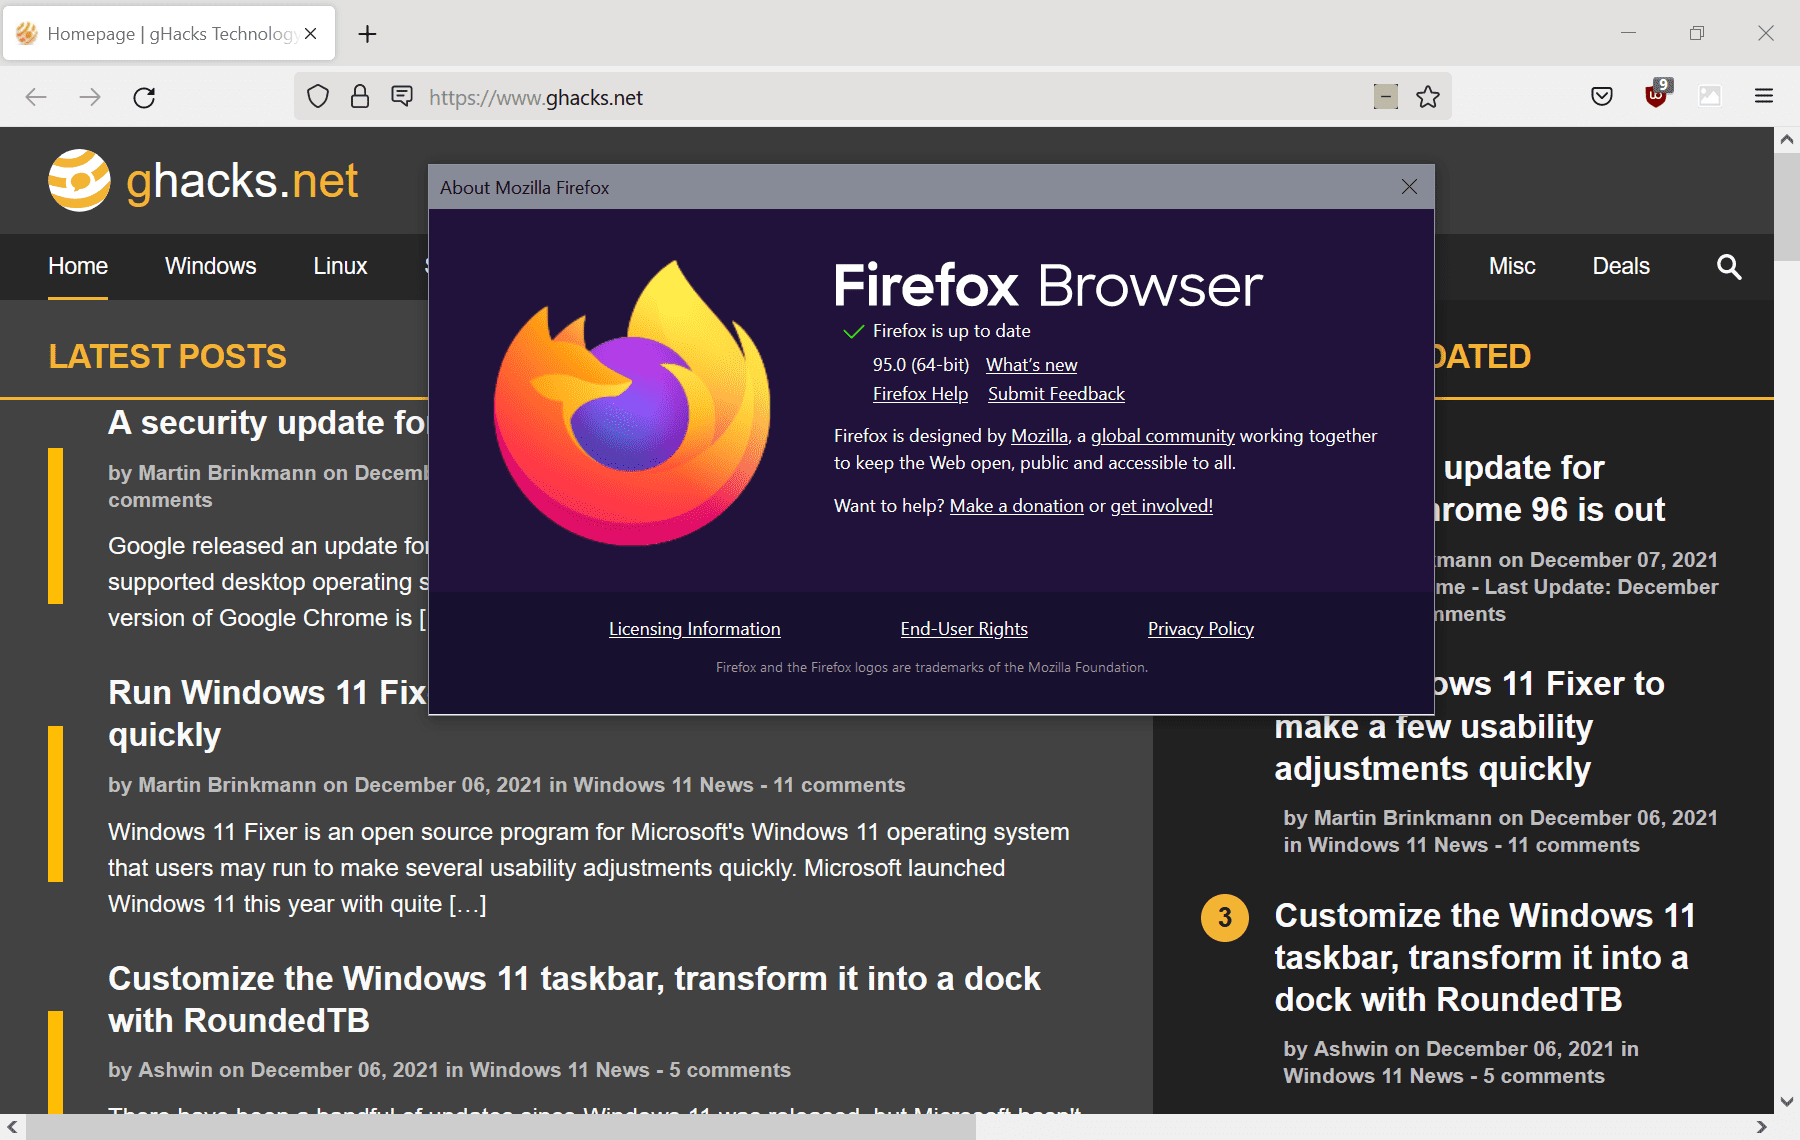 Mozilla Firefox 95.0 release: here is what is new